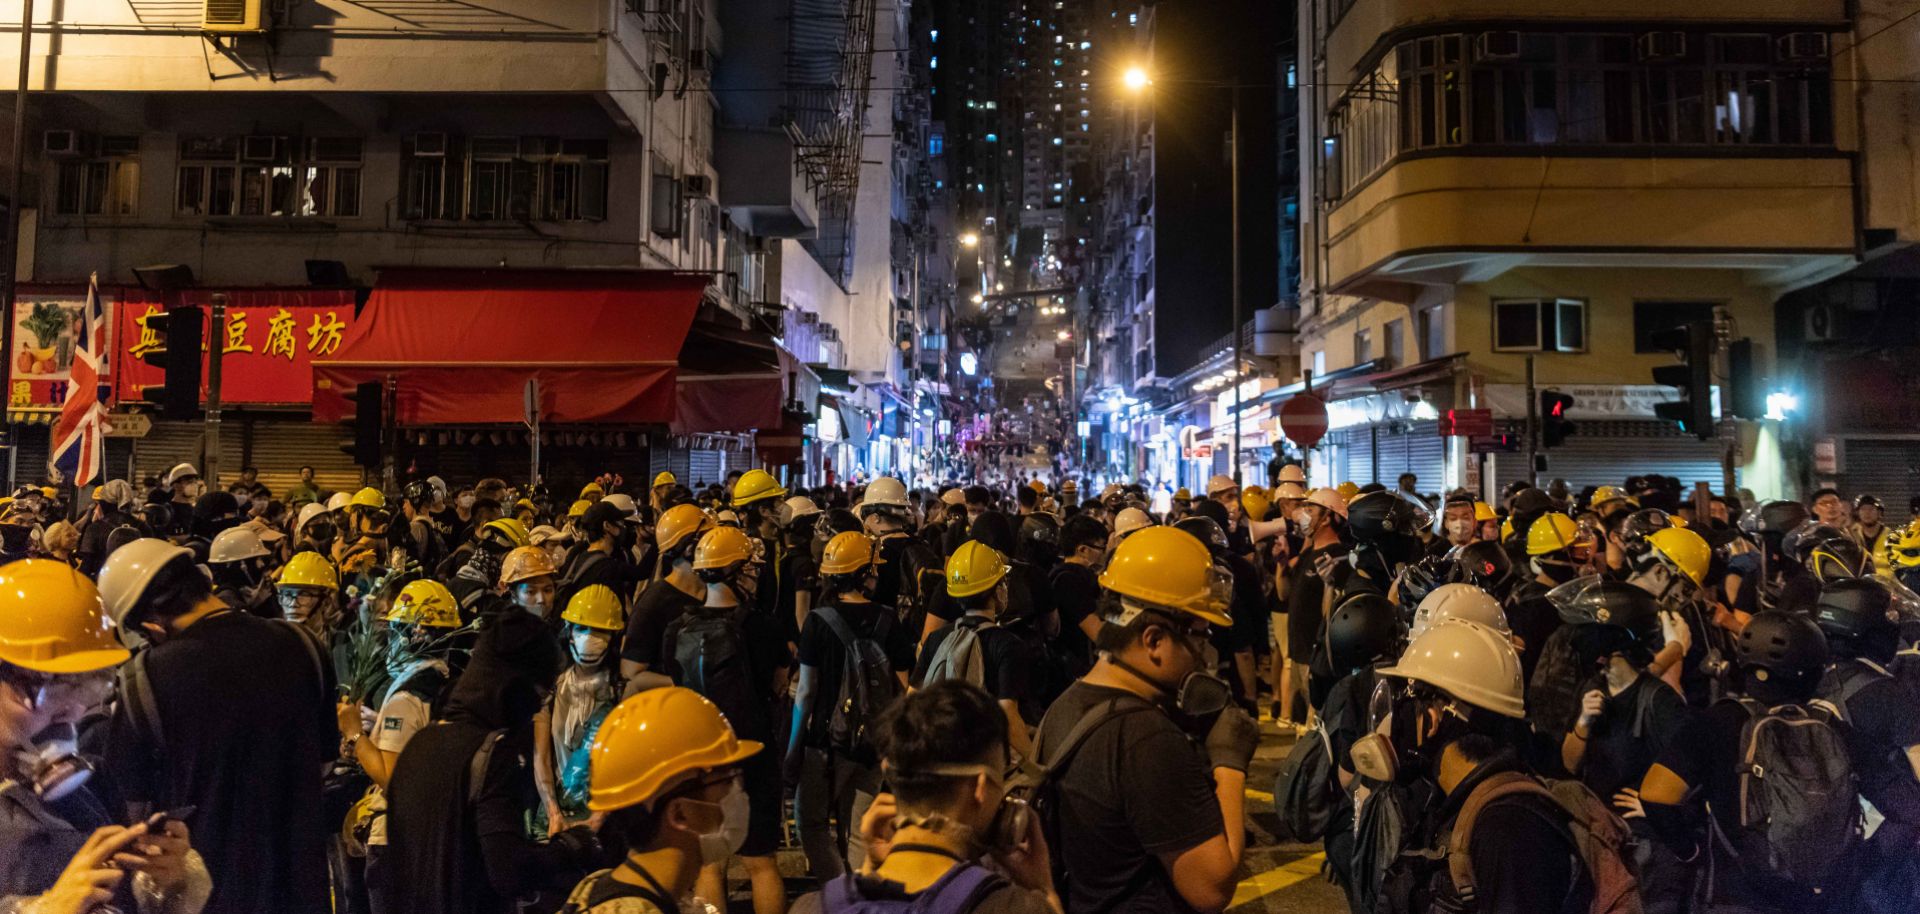 Protesters clash with police after taking part in an anti-extradition bill on July 22, 2019, in Hong Kong.